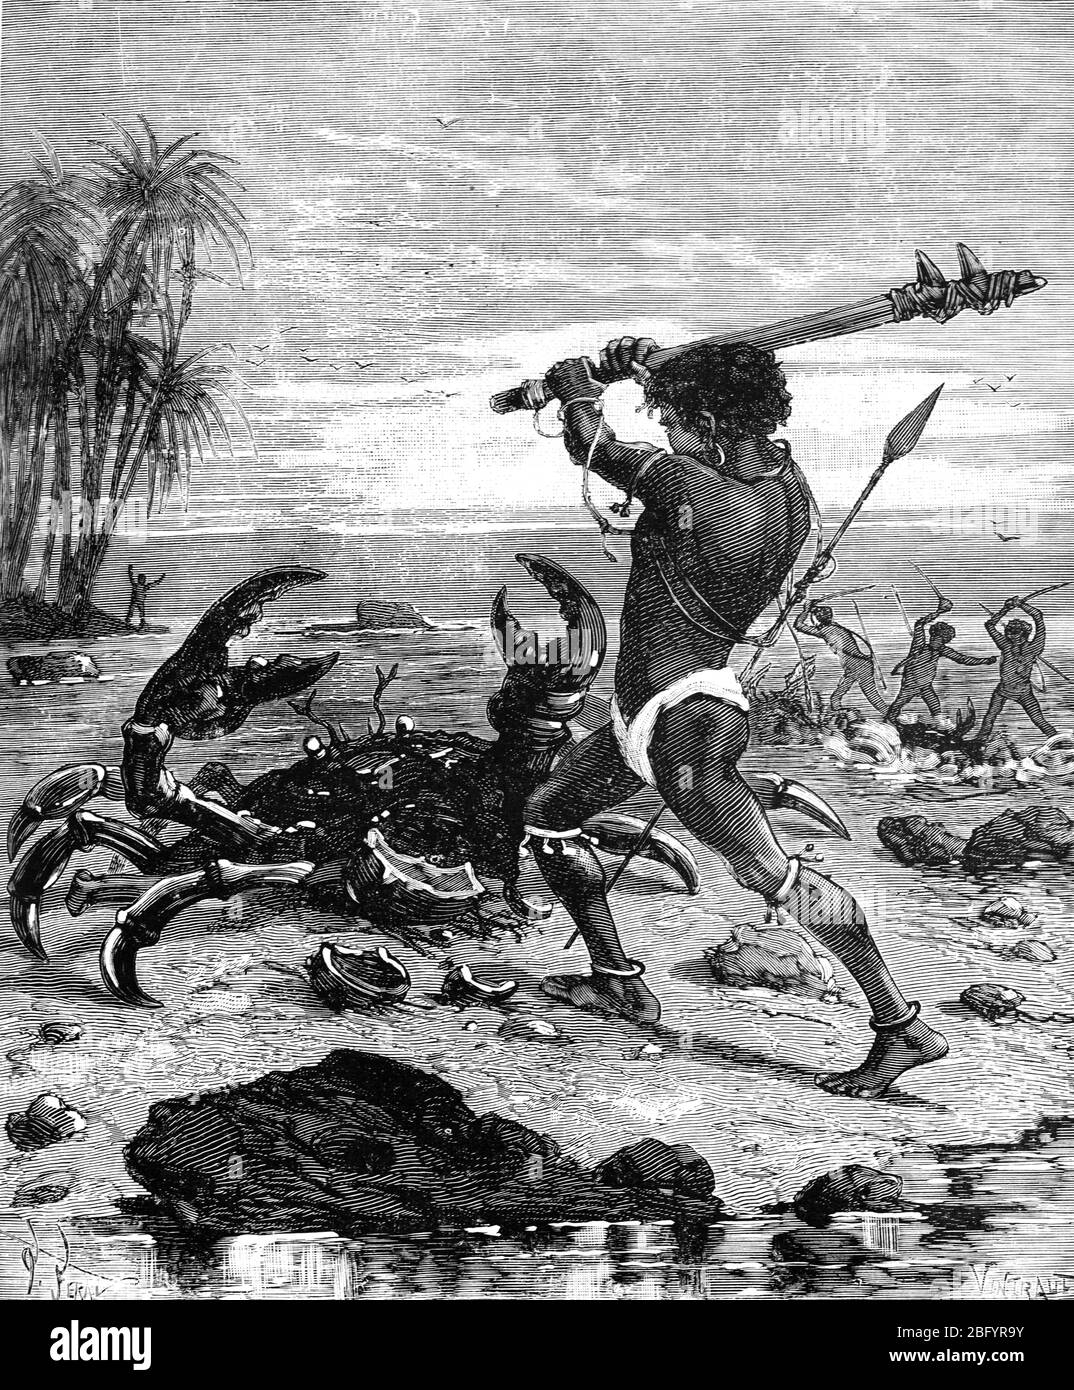 Local Islanders on Tuvalu Killing Giant Coconut Crabs, Birgus latro, aka Robber Crabs or Palm Thief. Coconut Crabs grow up to a metre in length and are the world's largest arthropods. Found on islands of the Indian and Pacific Oceans. Vintage or Old Illustration or Engraving 1890 Stock Photo